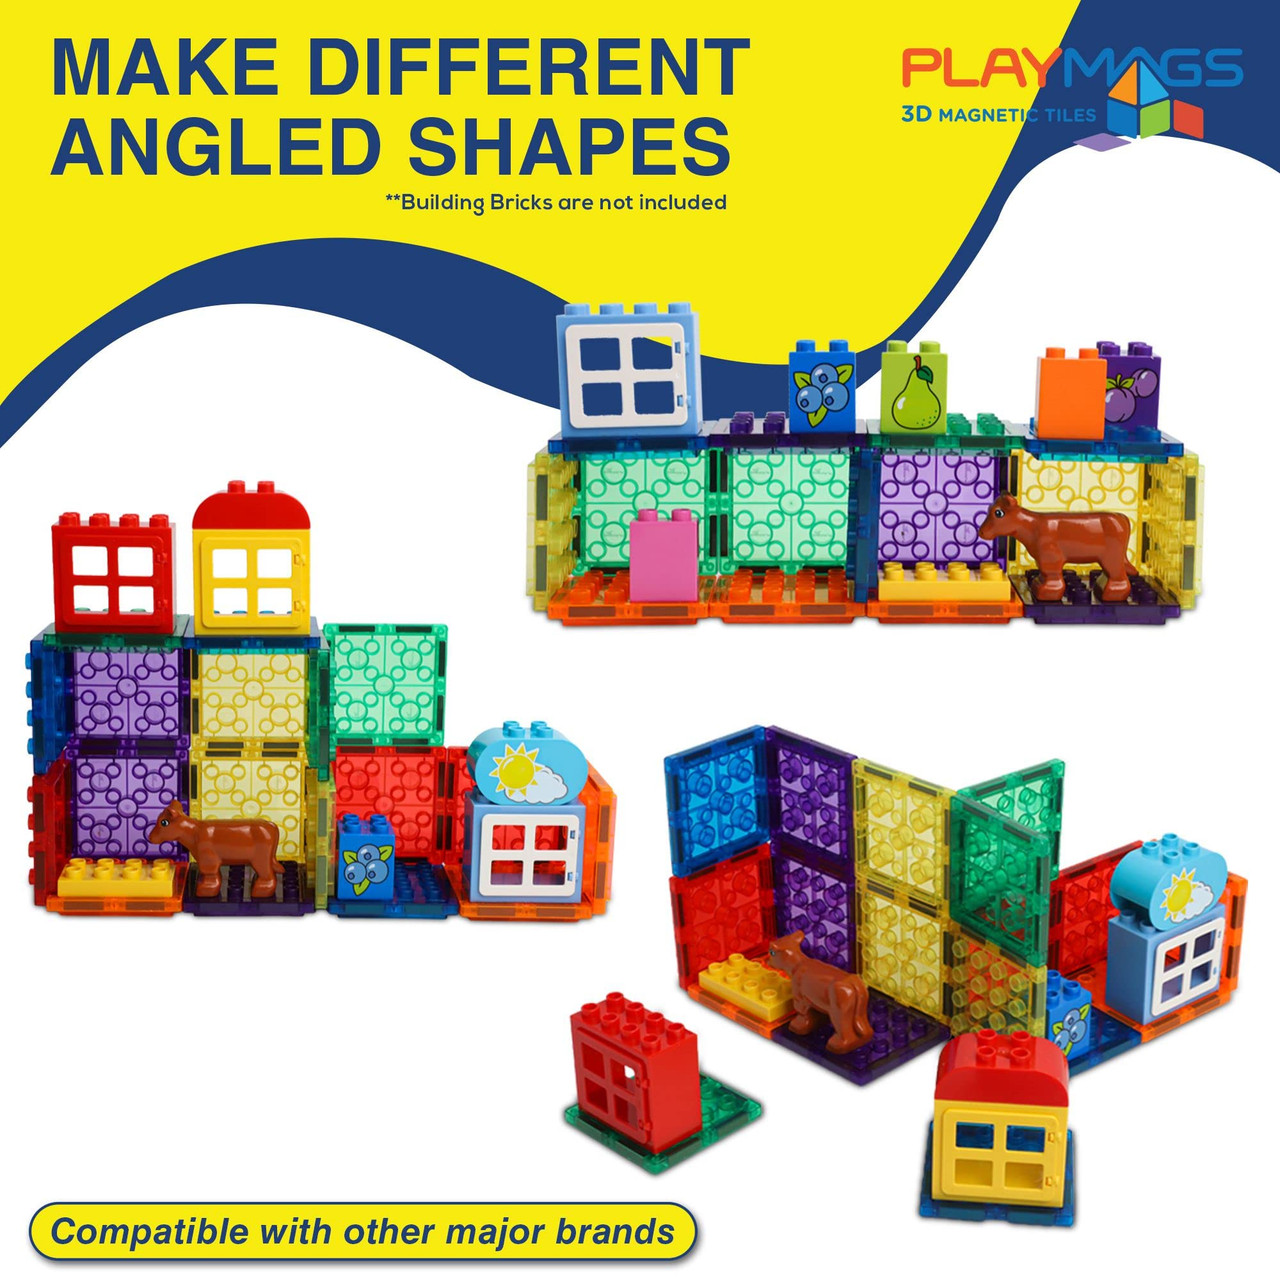 Shapemags 100 Piece Magnetic Tiles Basic Starter Set, 5 Shapes Included